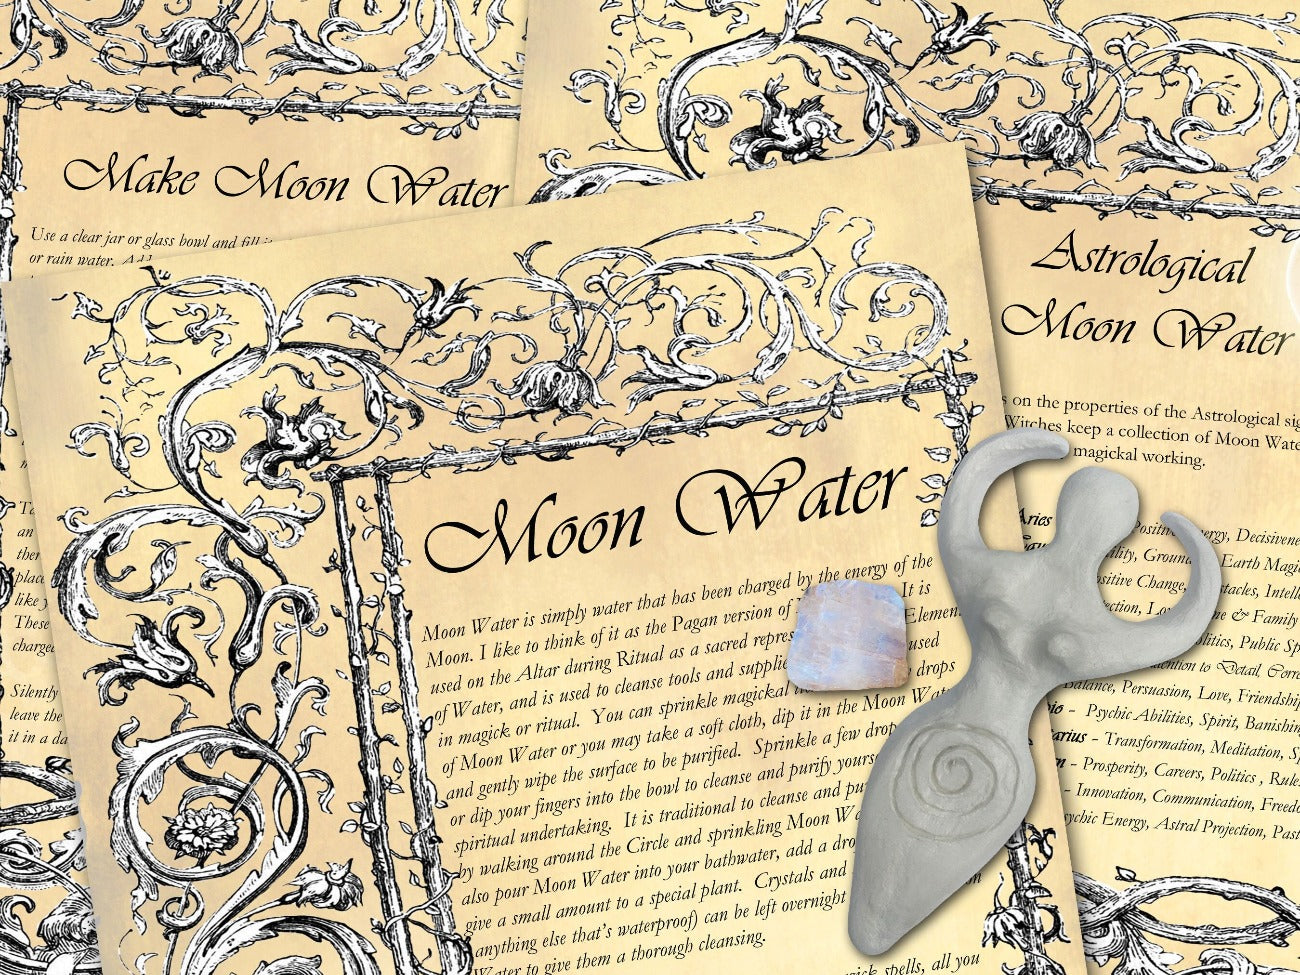 MOON WATER Recipe, 3 Pages Digital Download, Wicca Water Blessing, How to Make Moon Water, Moon Water Potion, Lunar Water, Wicca Holy Water - Morgana Magick Spell